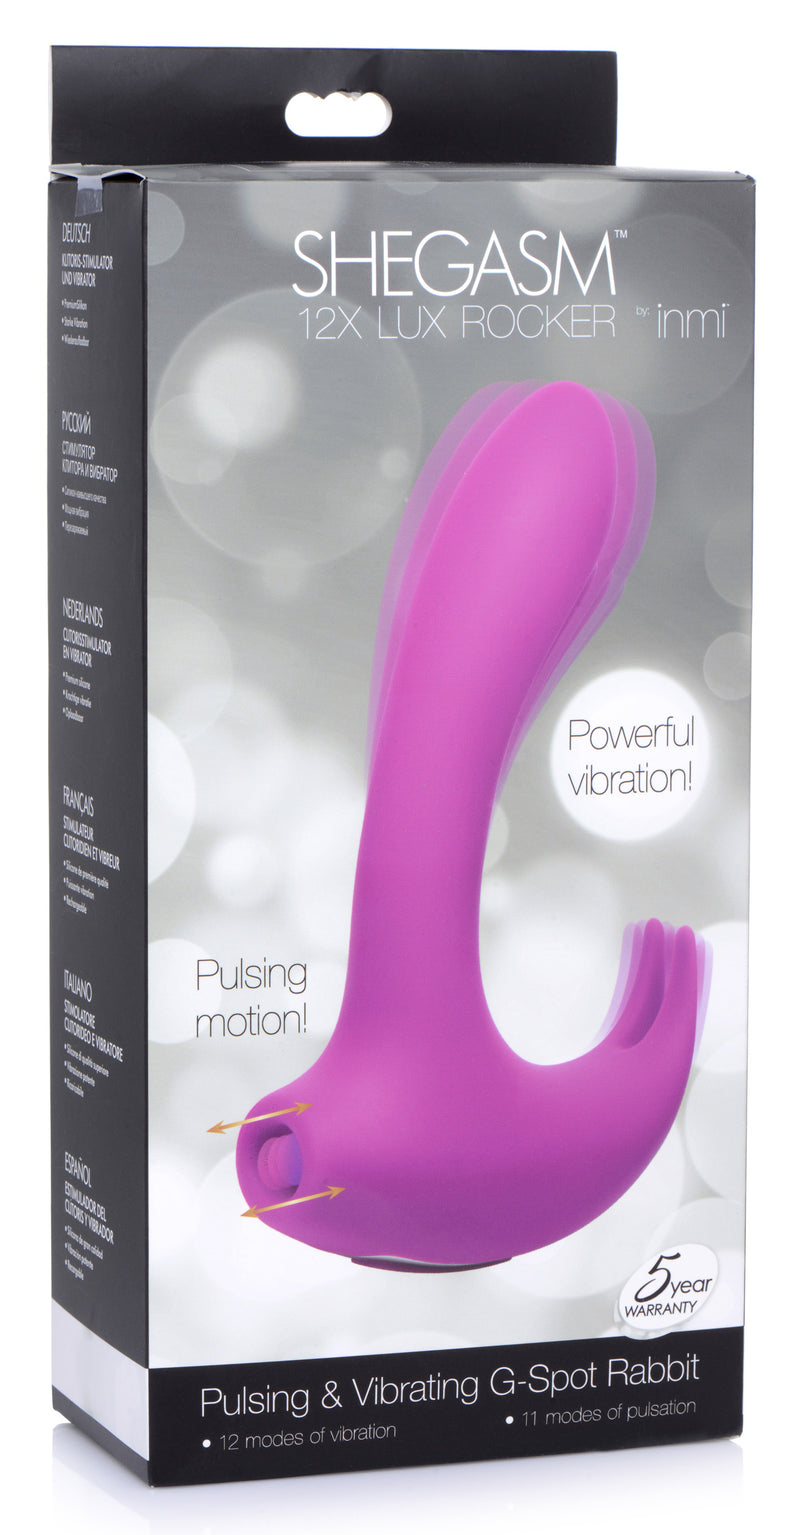 12X Lux Rocker Pulsing and Vibrating G-Spot Rabbit vibesextoys from Inmi